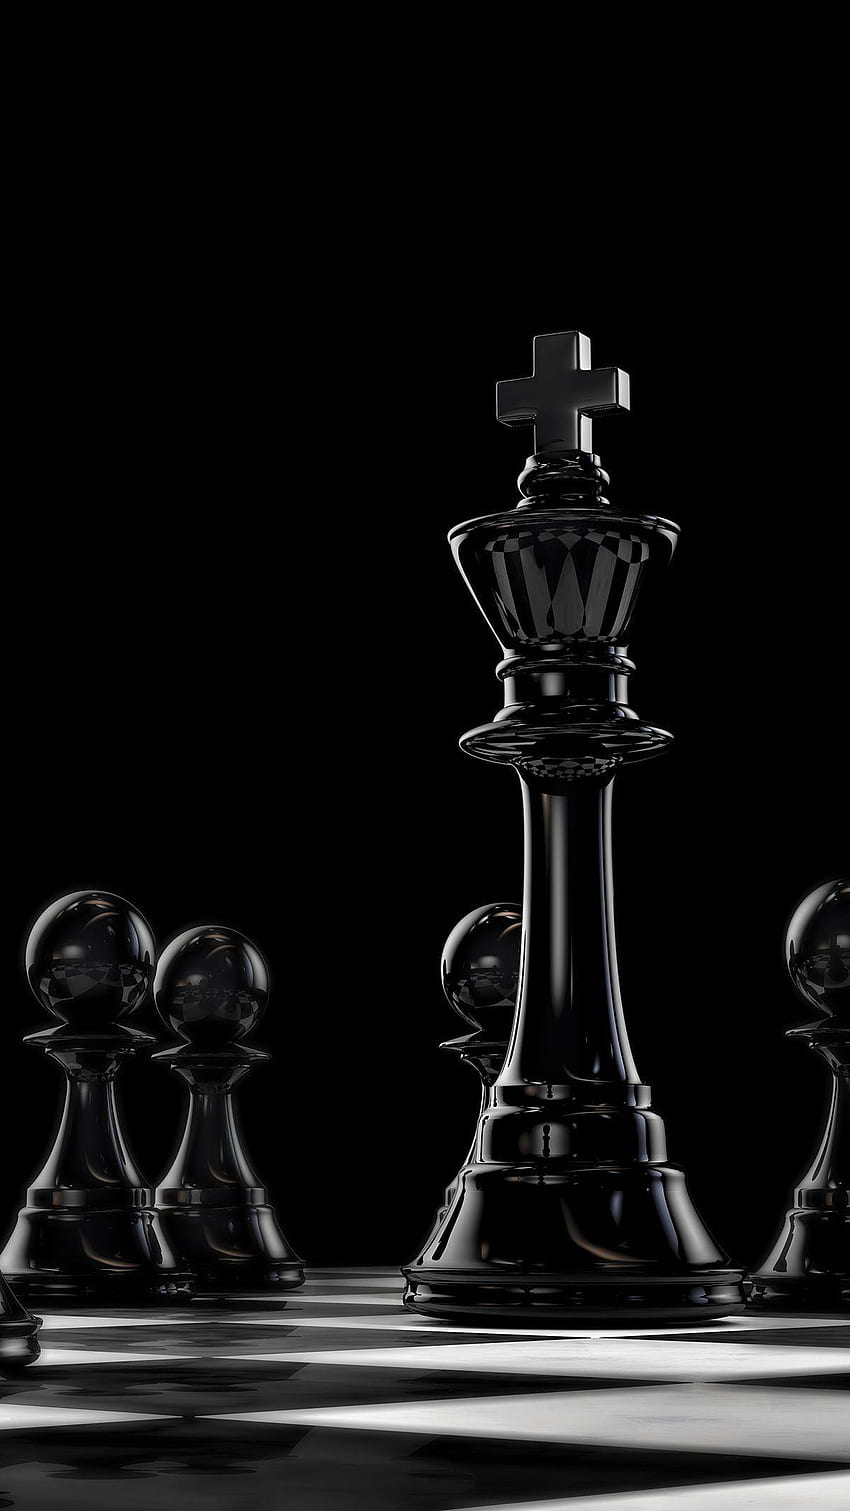 The Game Of Chess Background, Landscape Of Fantasy Photo, 3d Chess Rock, Hd  Photography Photo Background Image And Wallpaper for Free Download